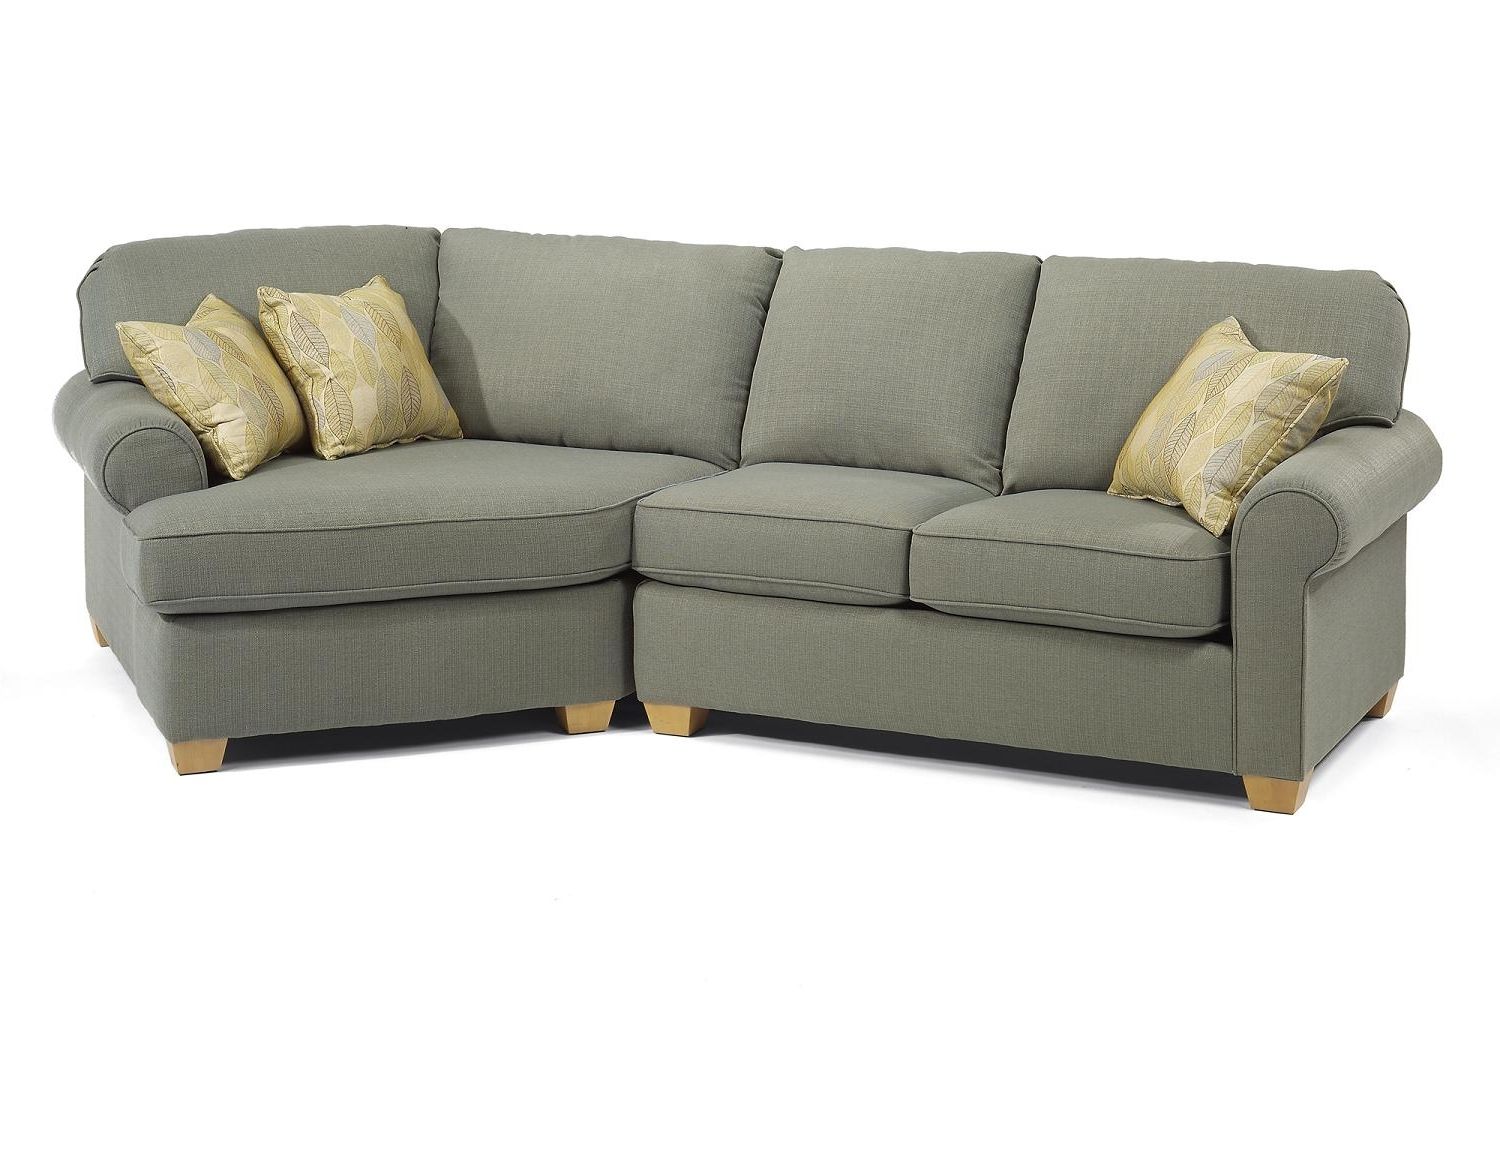 Sofas With Chaise With Regard To Favorite Chaise Sofa (View 7 of 15)